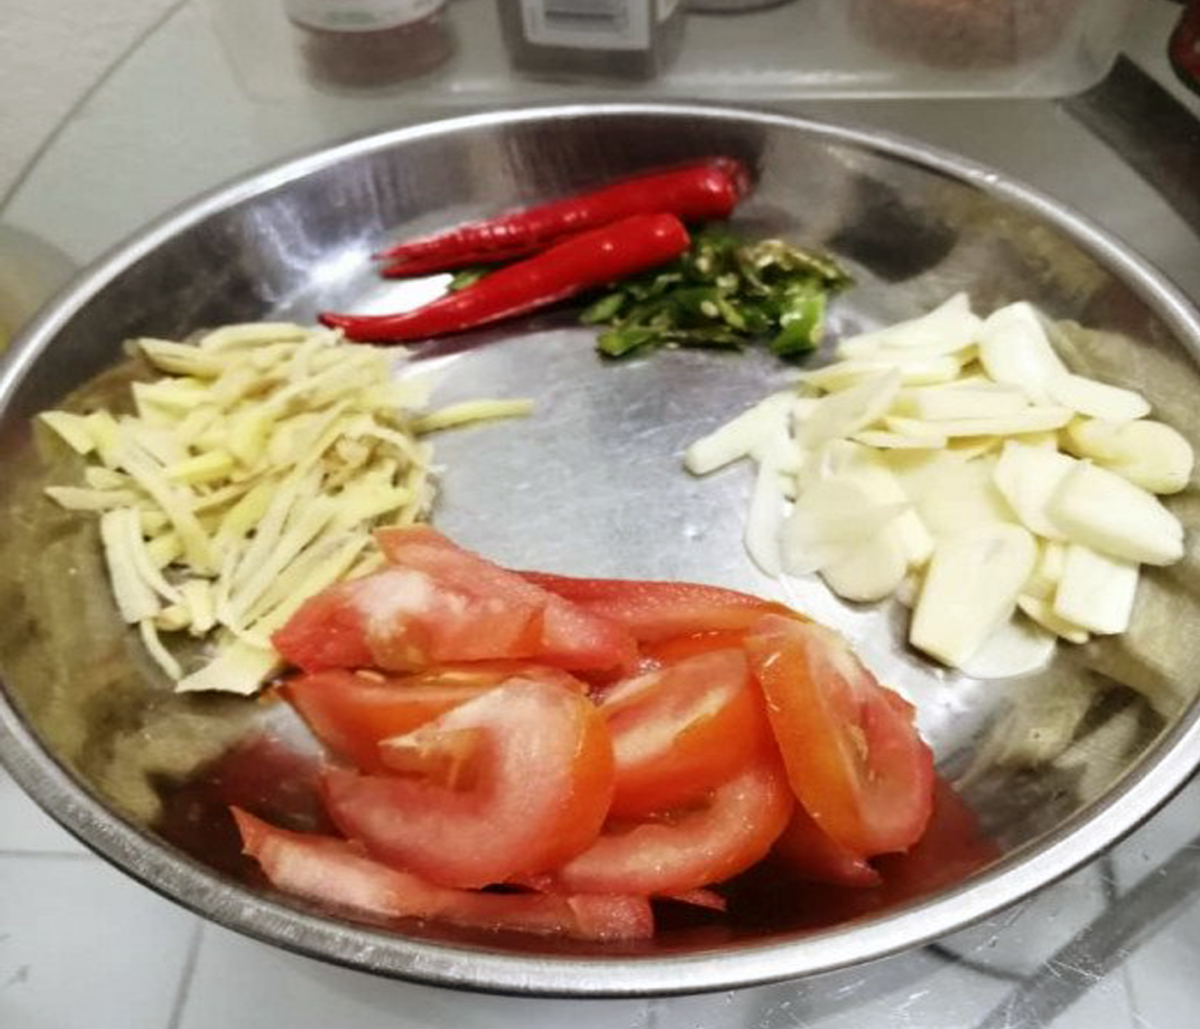 Clockwise from top - Red and green chilies, sliced garlic, sliced tomatoes, and julienned ginger